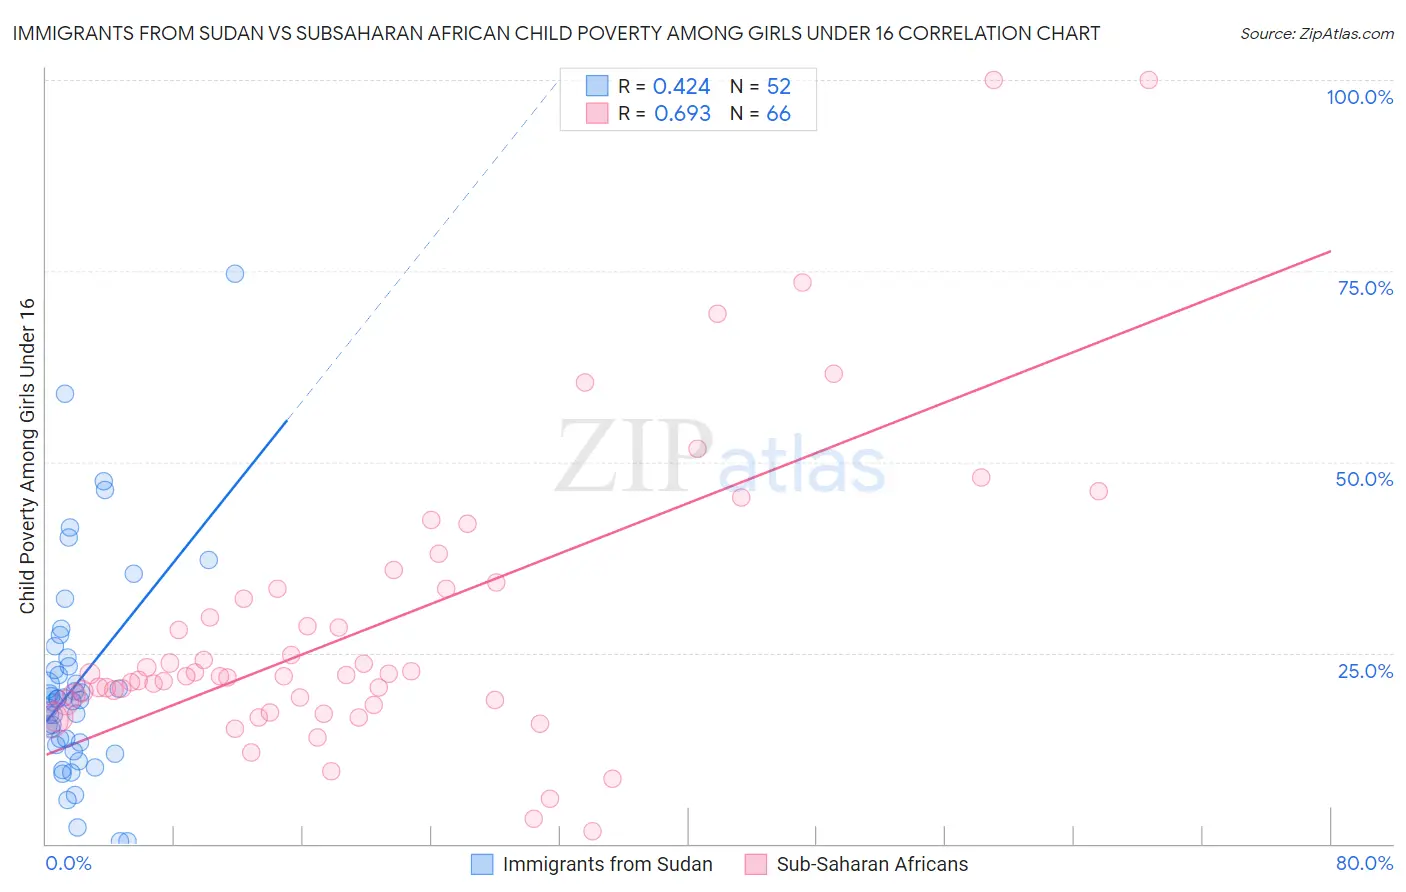 Immigrants from Sudan vs Subsaharan African Child Poverty Among Girls Under 16